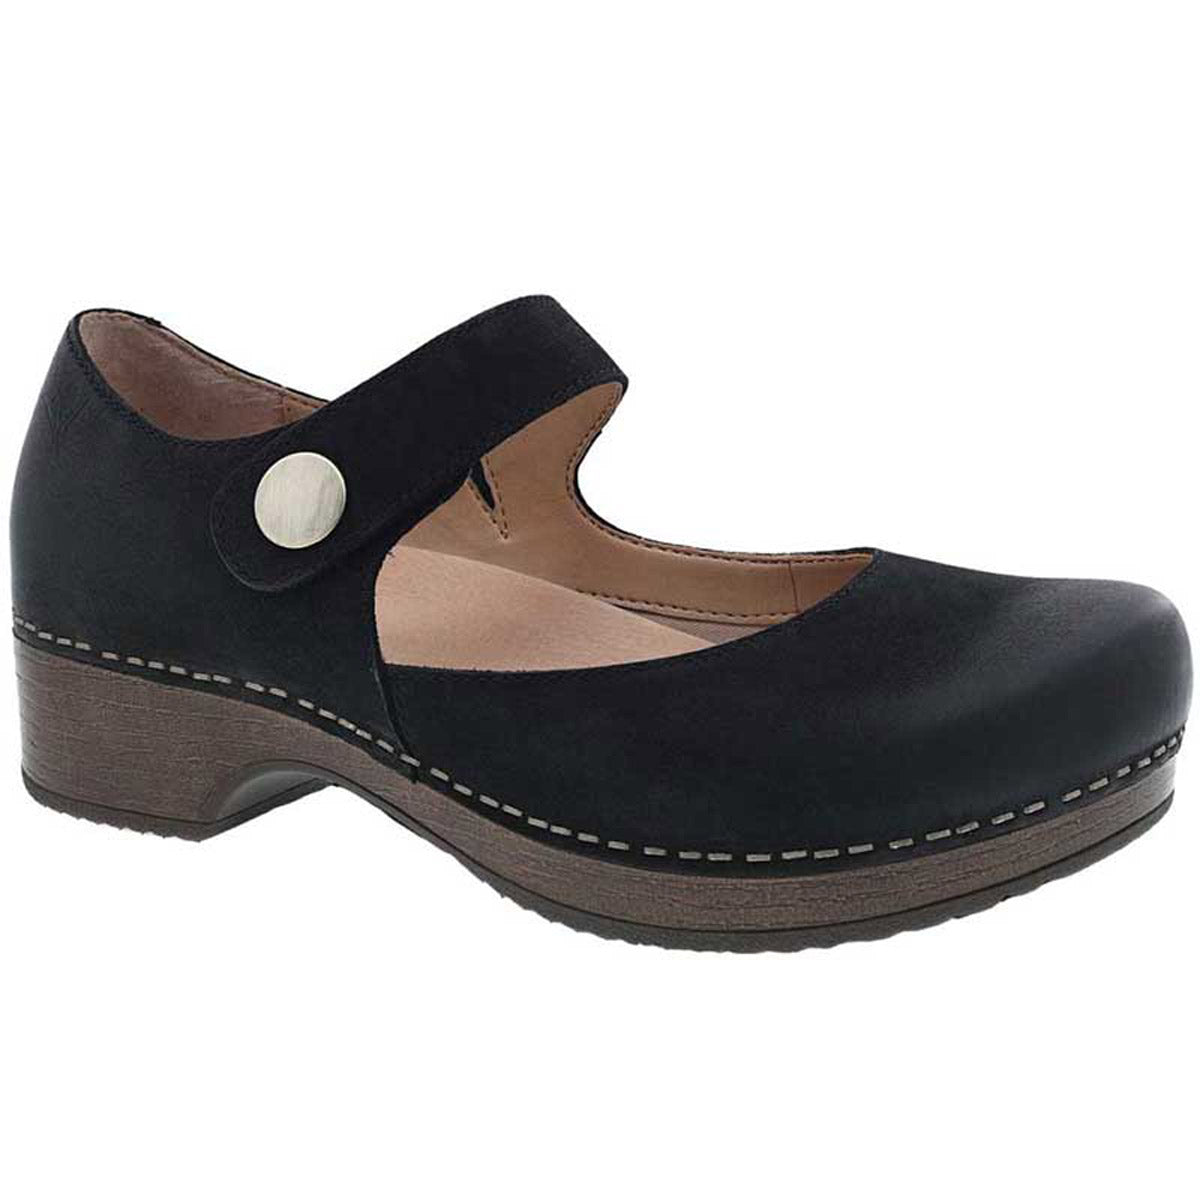 Black Dansko Beatrice Mary Jane style women's shoe with a strap and button closure on a white background will be replaced with DANSKO BEATRICE BLACK BURNISHED - WOMENS by Dansko.